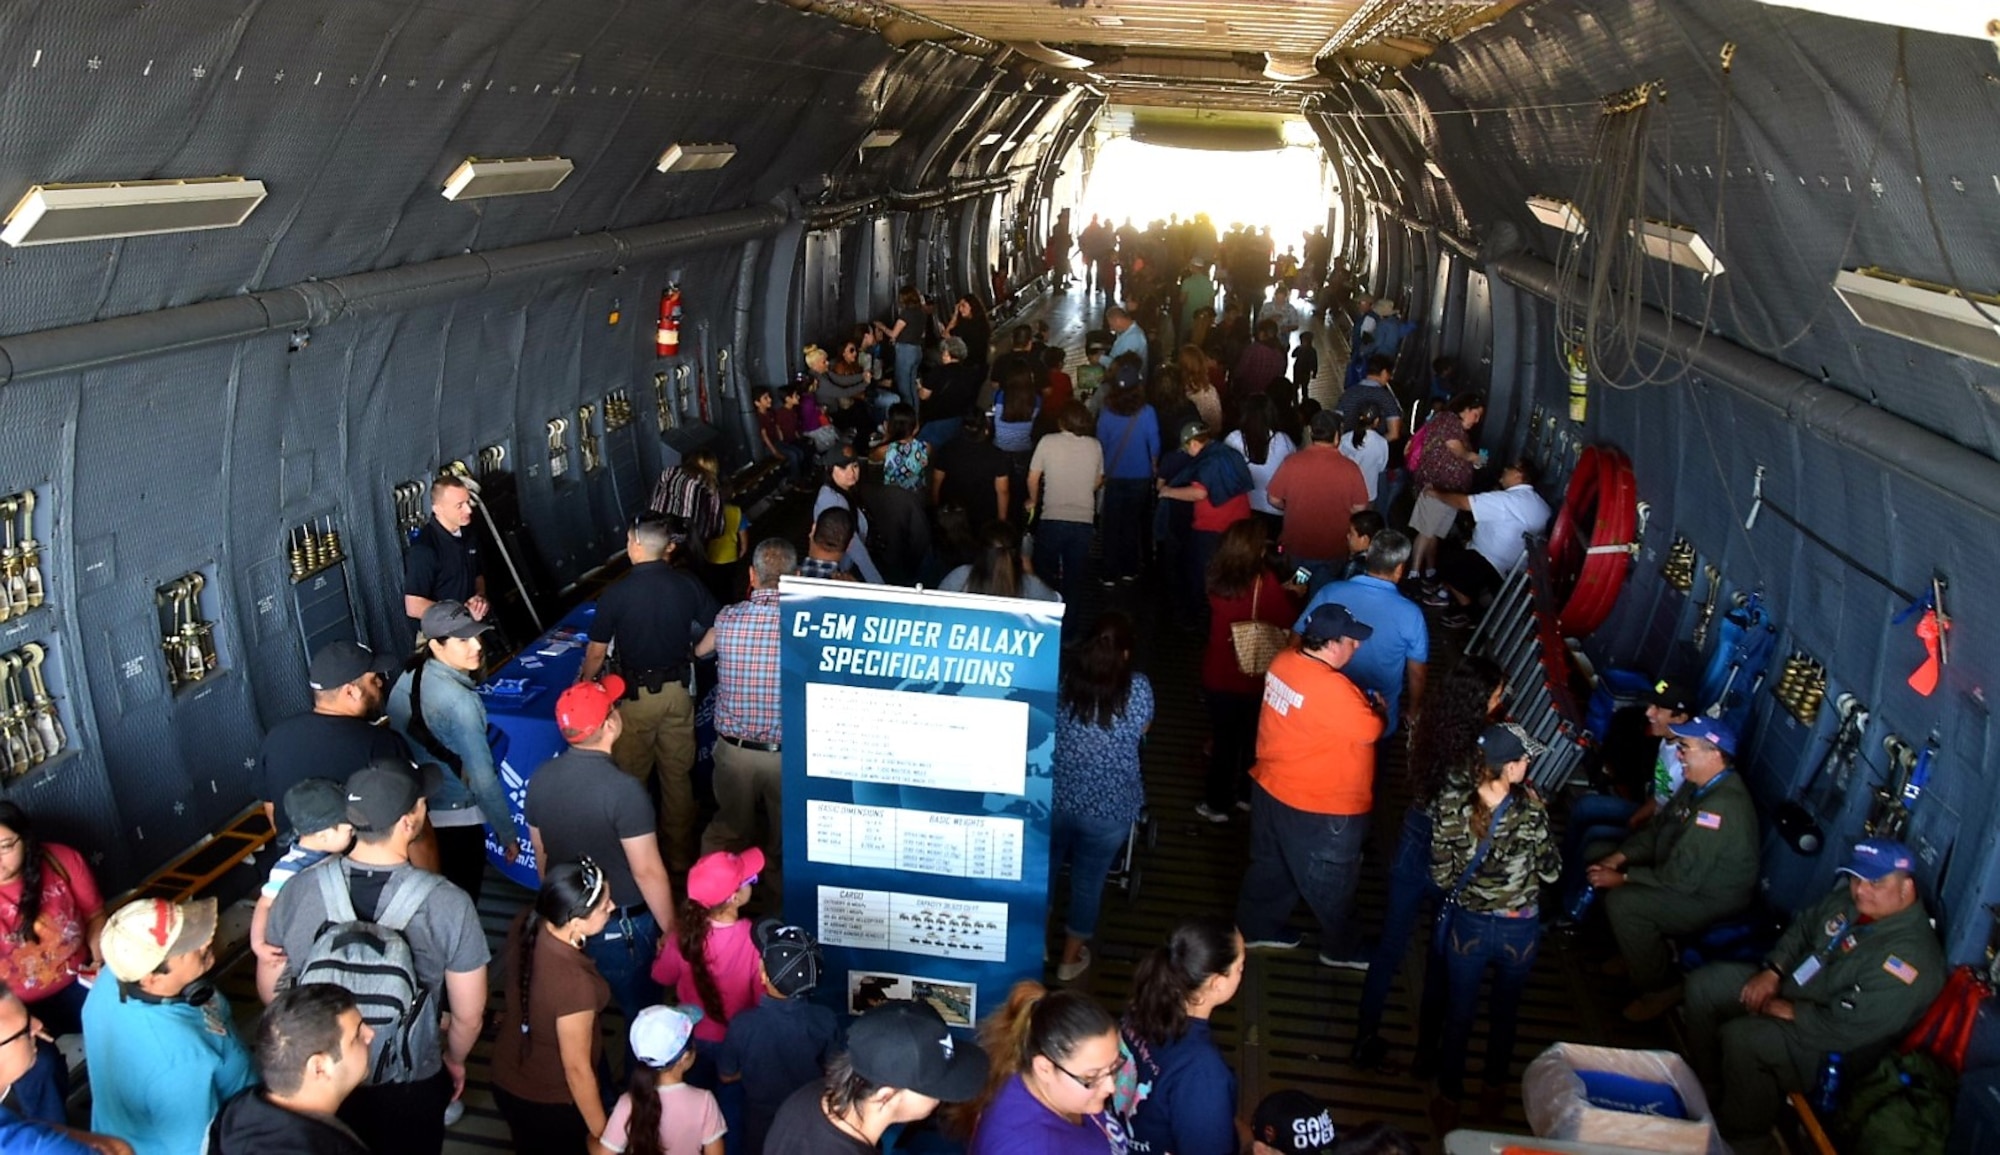 Washington’s Birthday Celebration Association Stars and Stripes Air Show Spectacular attendees walk through the 433rd Airlift Wing’s C-5M Super Galaxy from Joint Base San Antonio-Lackland, Texas at the at the Laredo International Airport in Laredo, Texas Feb. 17, 2019.